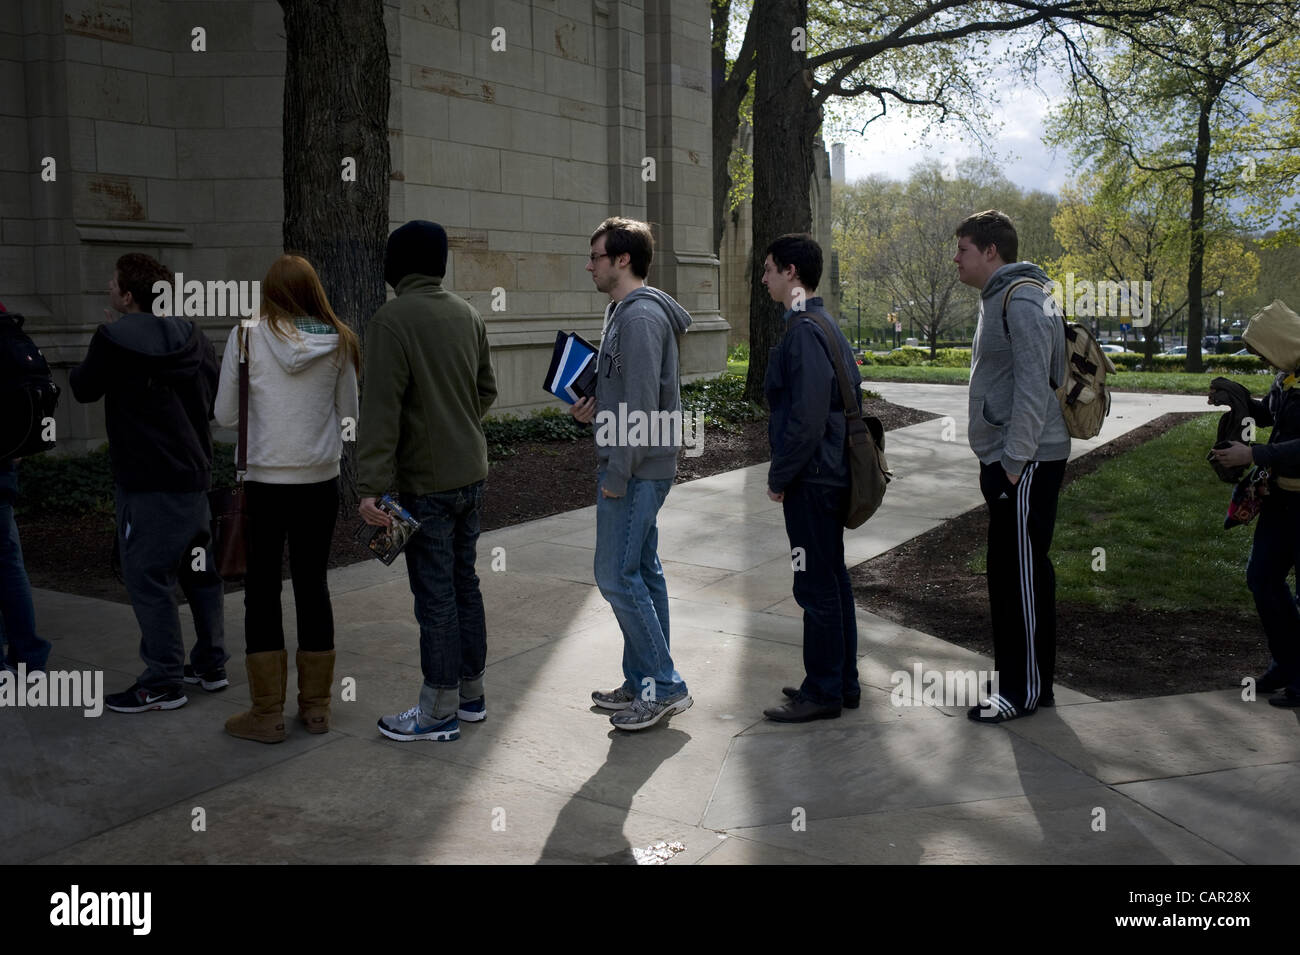 April 10, 2012 - Students queue in a security line outside the Cathedral of Learning at the University of Pittsburgh early Tuesday morning, April 10, 2012. 57 bomb threats have been received on campus since mid-February, causing increased security. Stock Photo